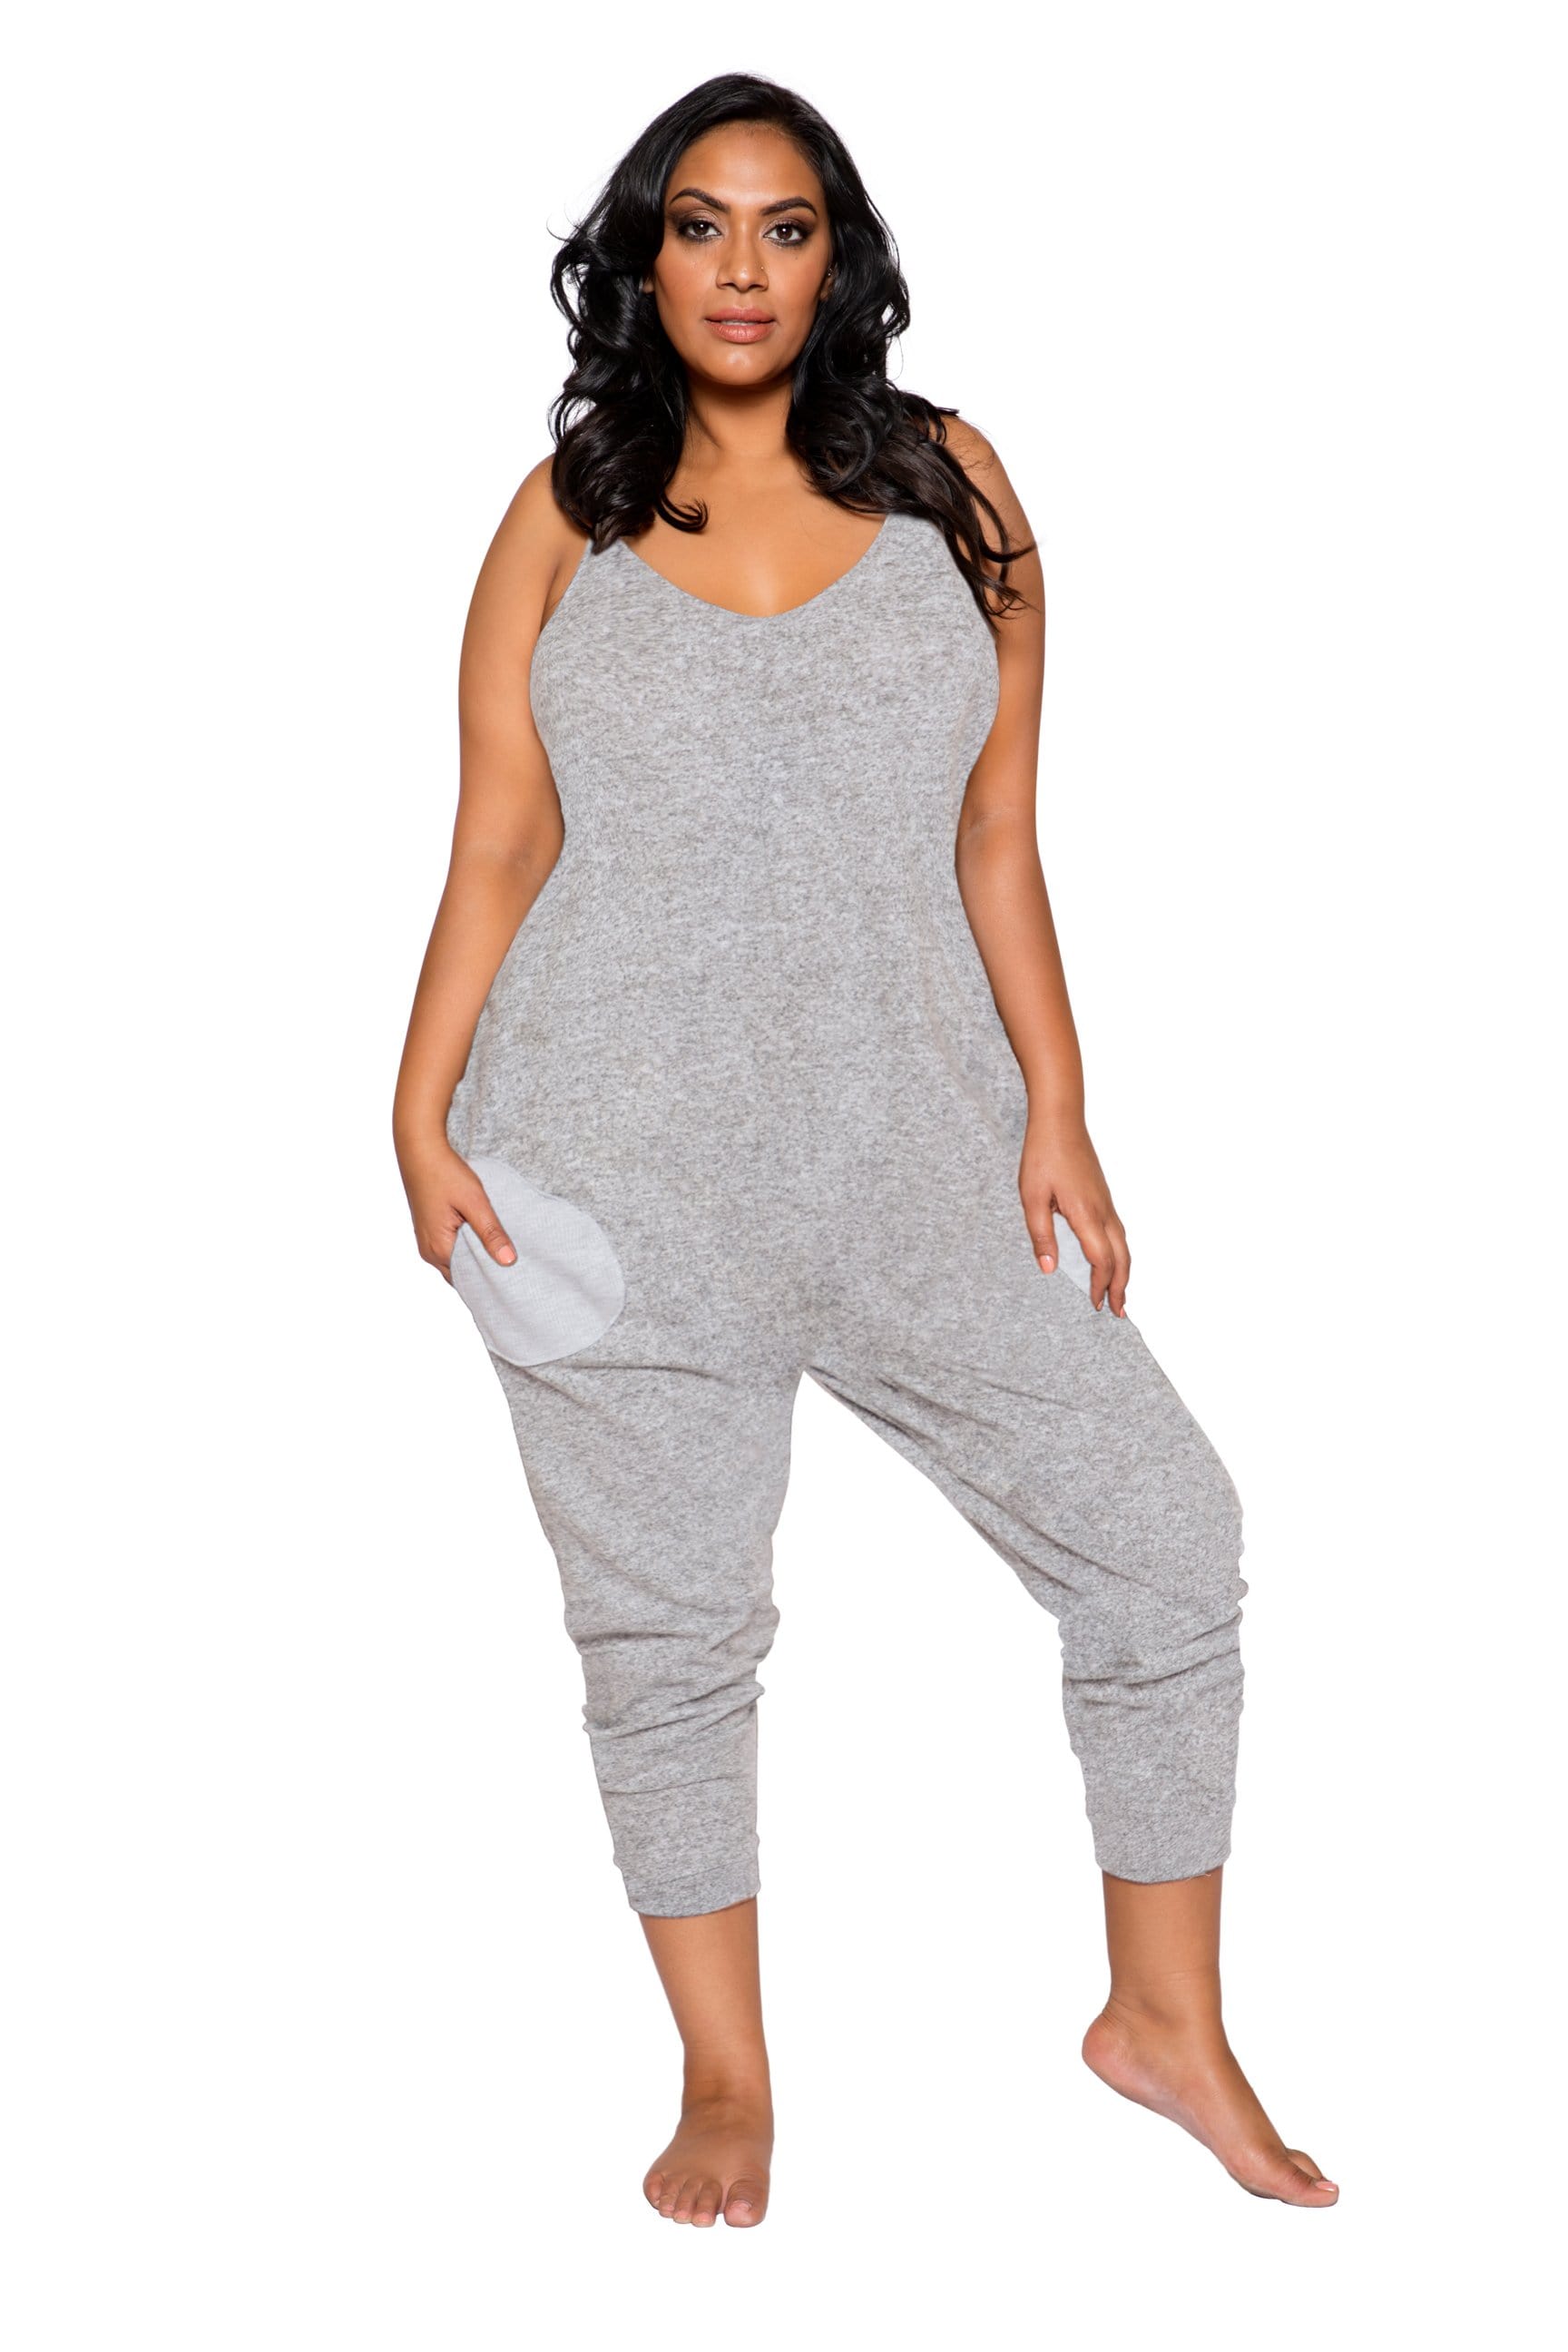 Roma XL/XXL / Grey Grey Plus Size Pajama Jumpsuit w/ Pockets (Black also available) SHC-LI294-GREY-XL/XXL Black Grey Plus Size Pajama Jumpsuit w/ Pockets | ROMA COSTUME LI294 Apparel & Accessories > Clothing > One Pieces > Jumpsuits & Rompers